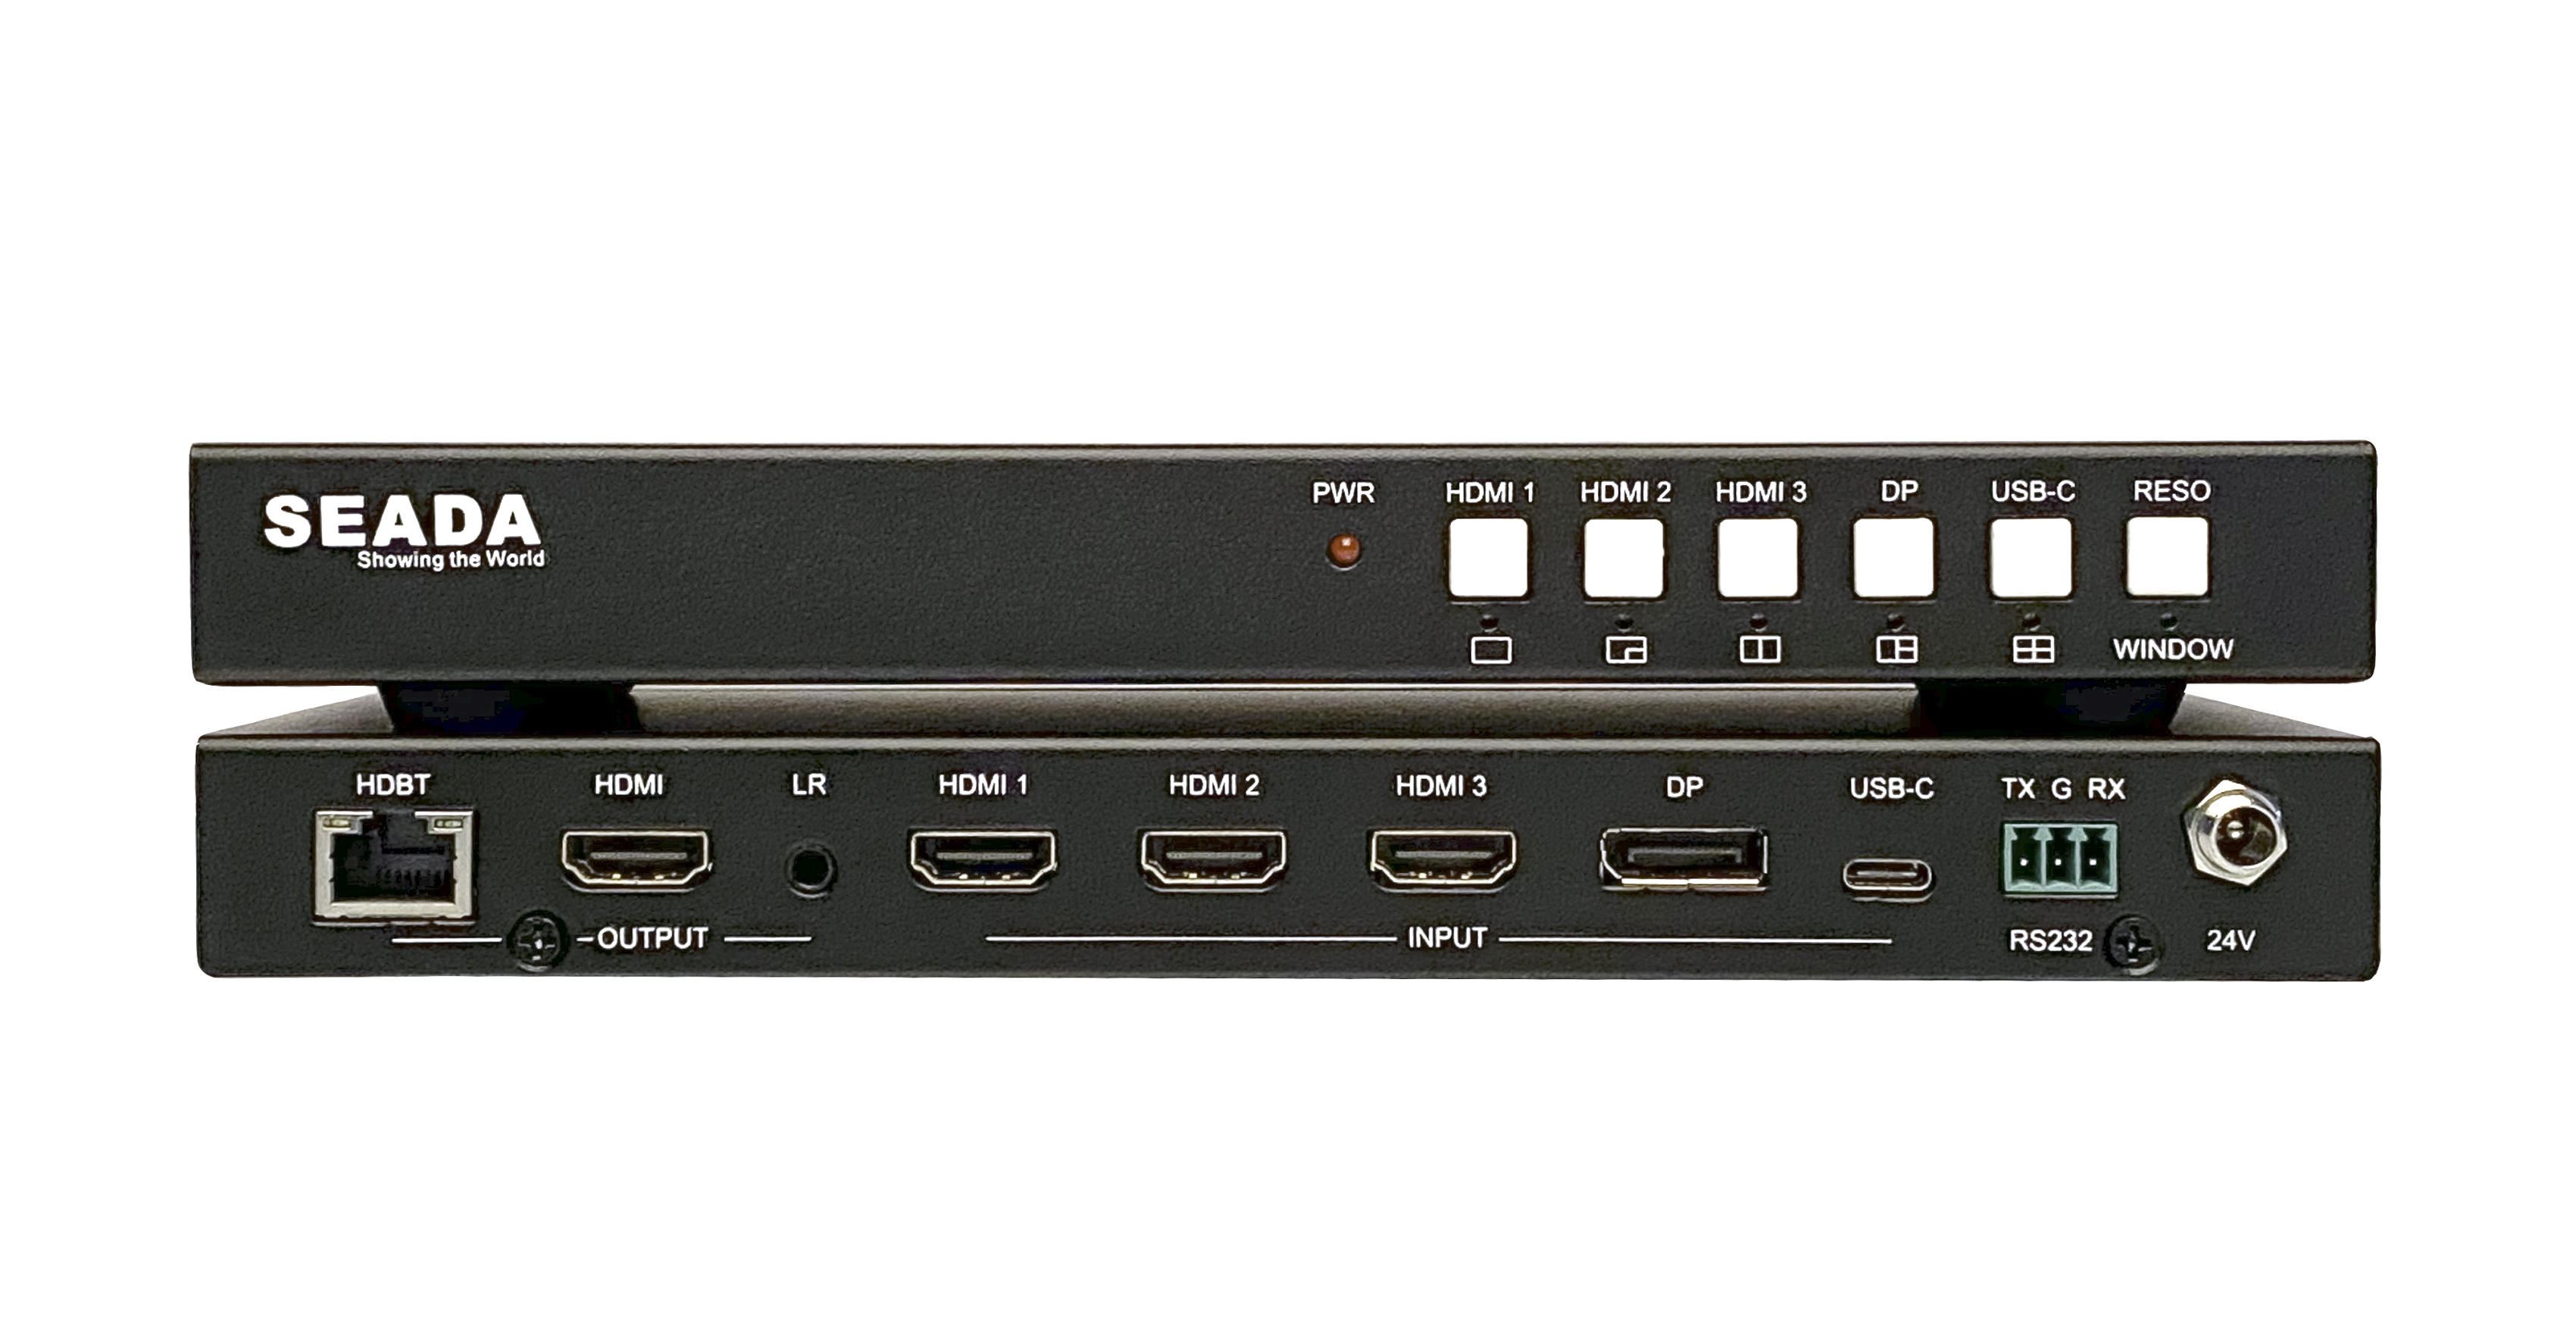 SD-MV-0501 Multiviewer product image.